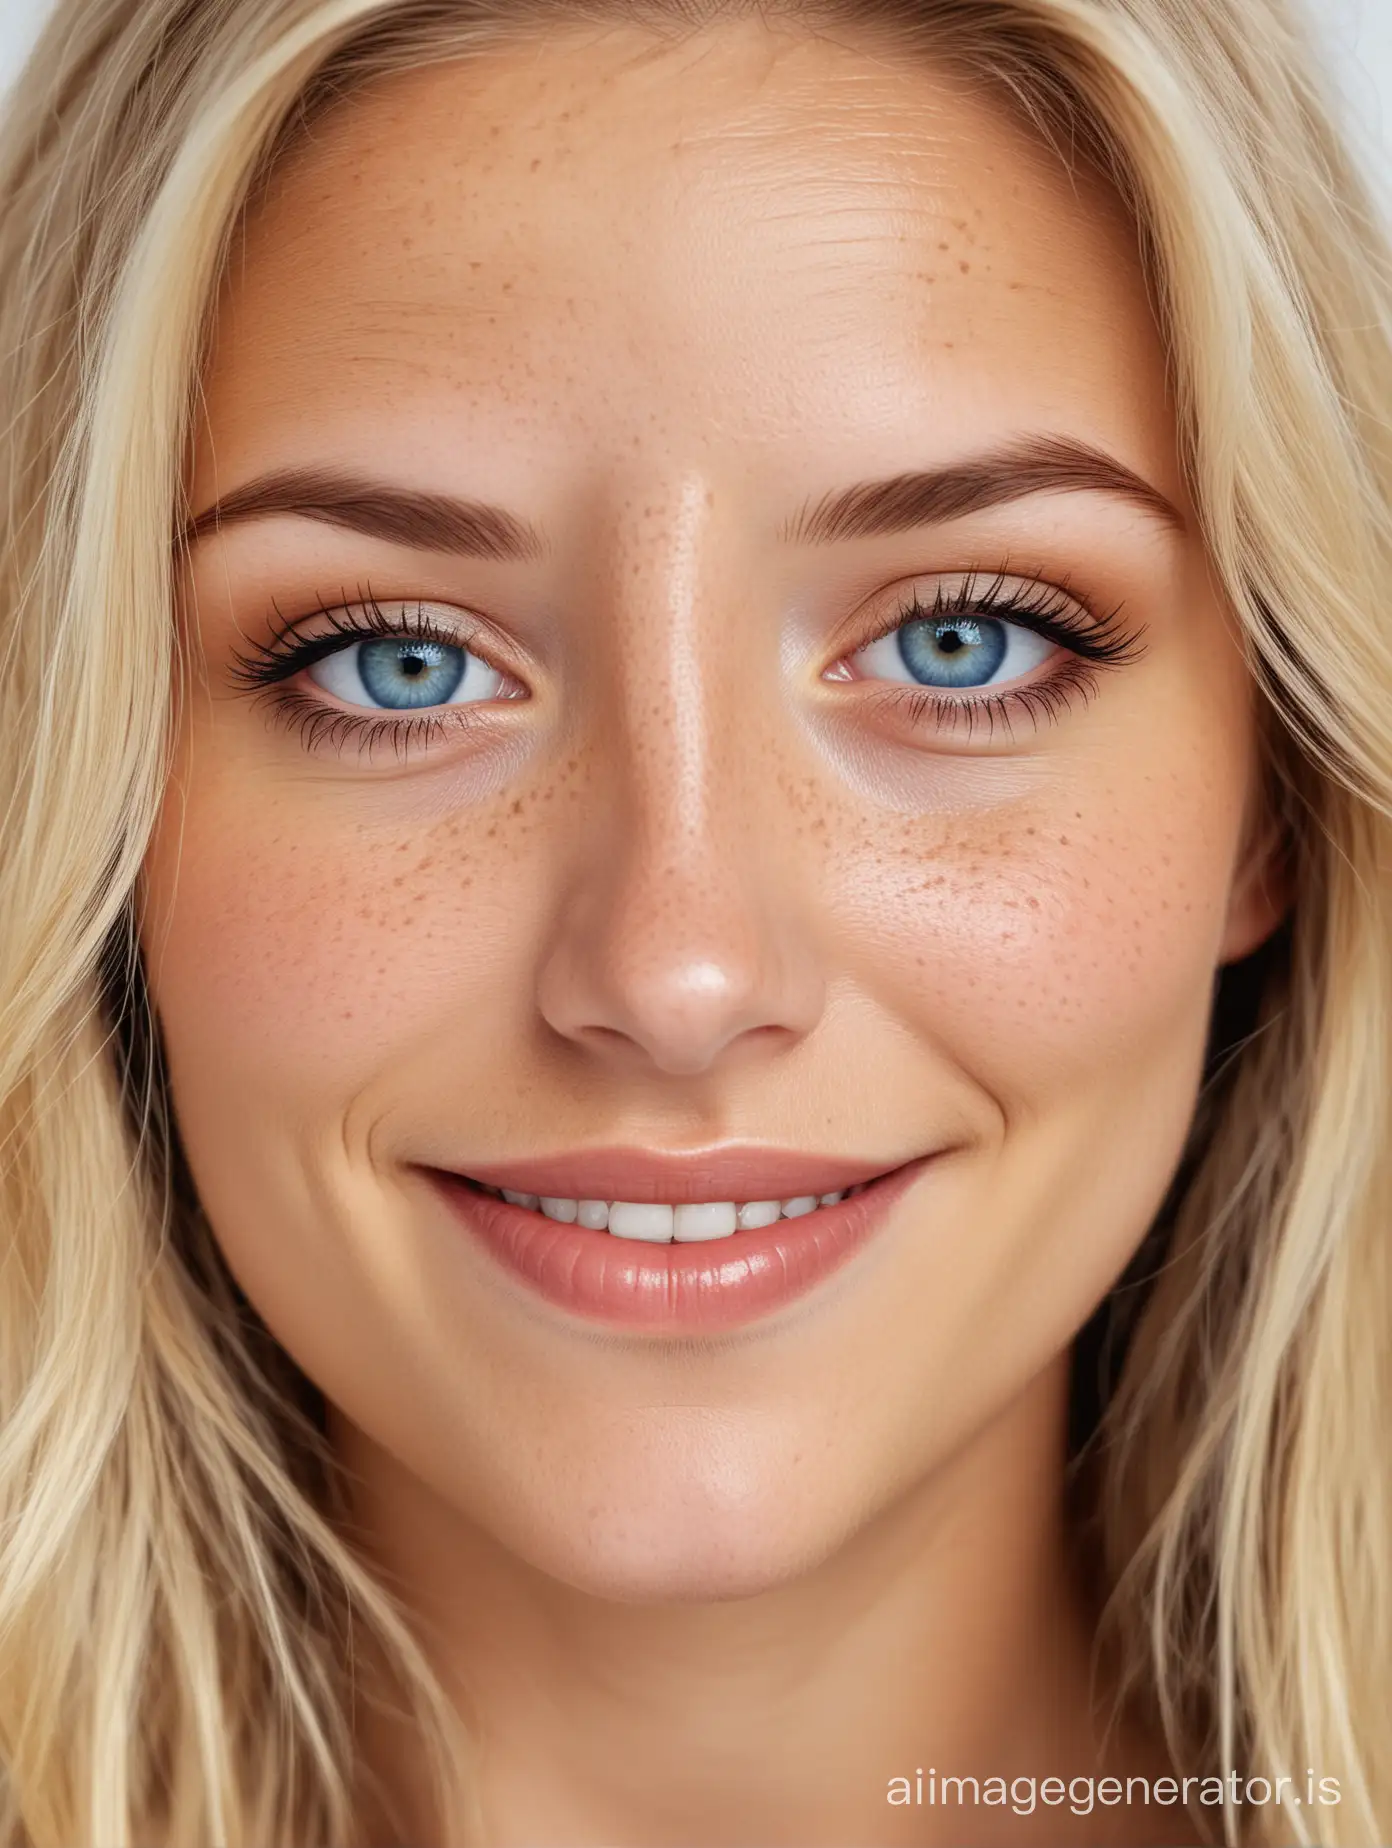 face of a beautiful woman close-up, you can see the details perfectly, loose blonde hair, beautiful and wide smile, blue eyes, small nose, freckles